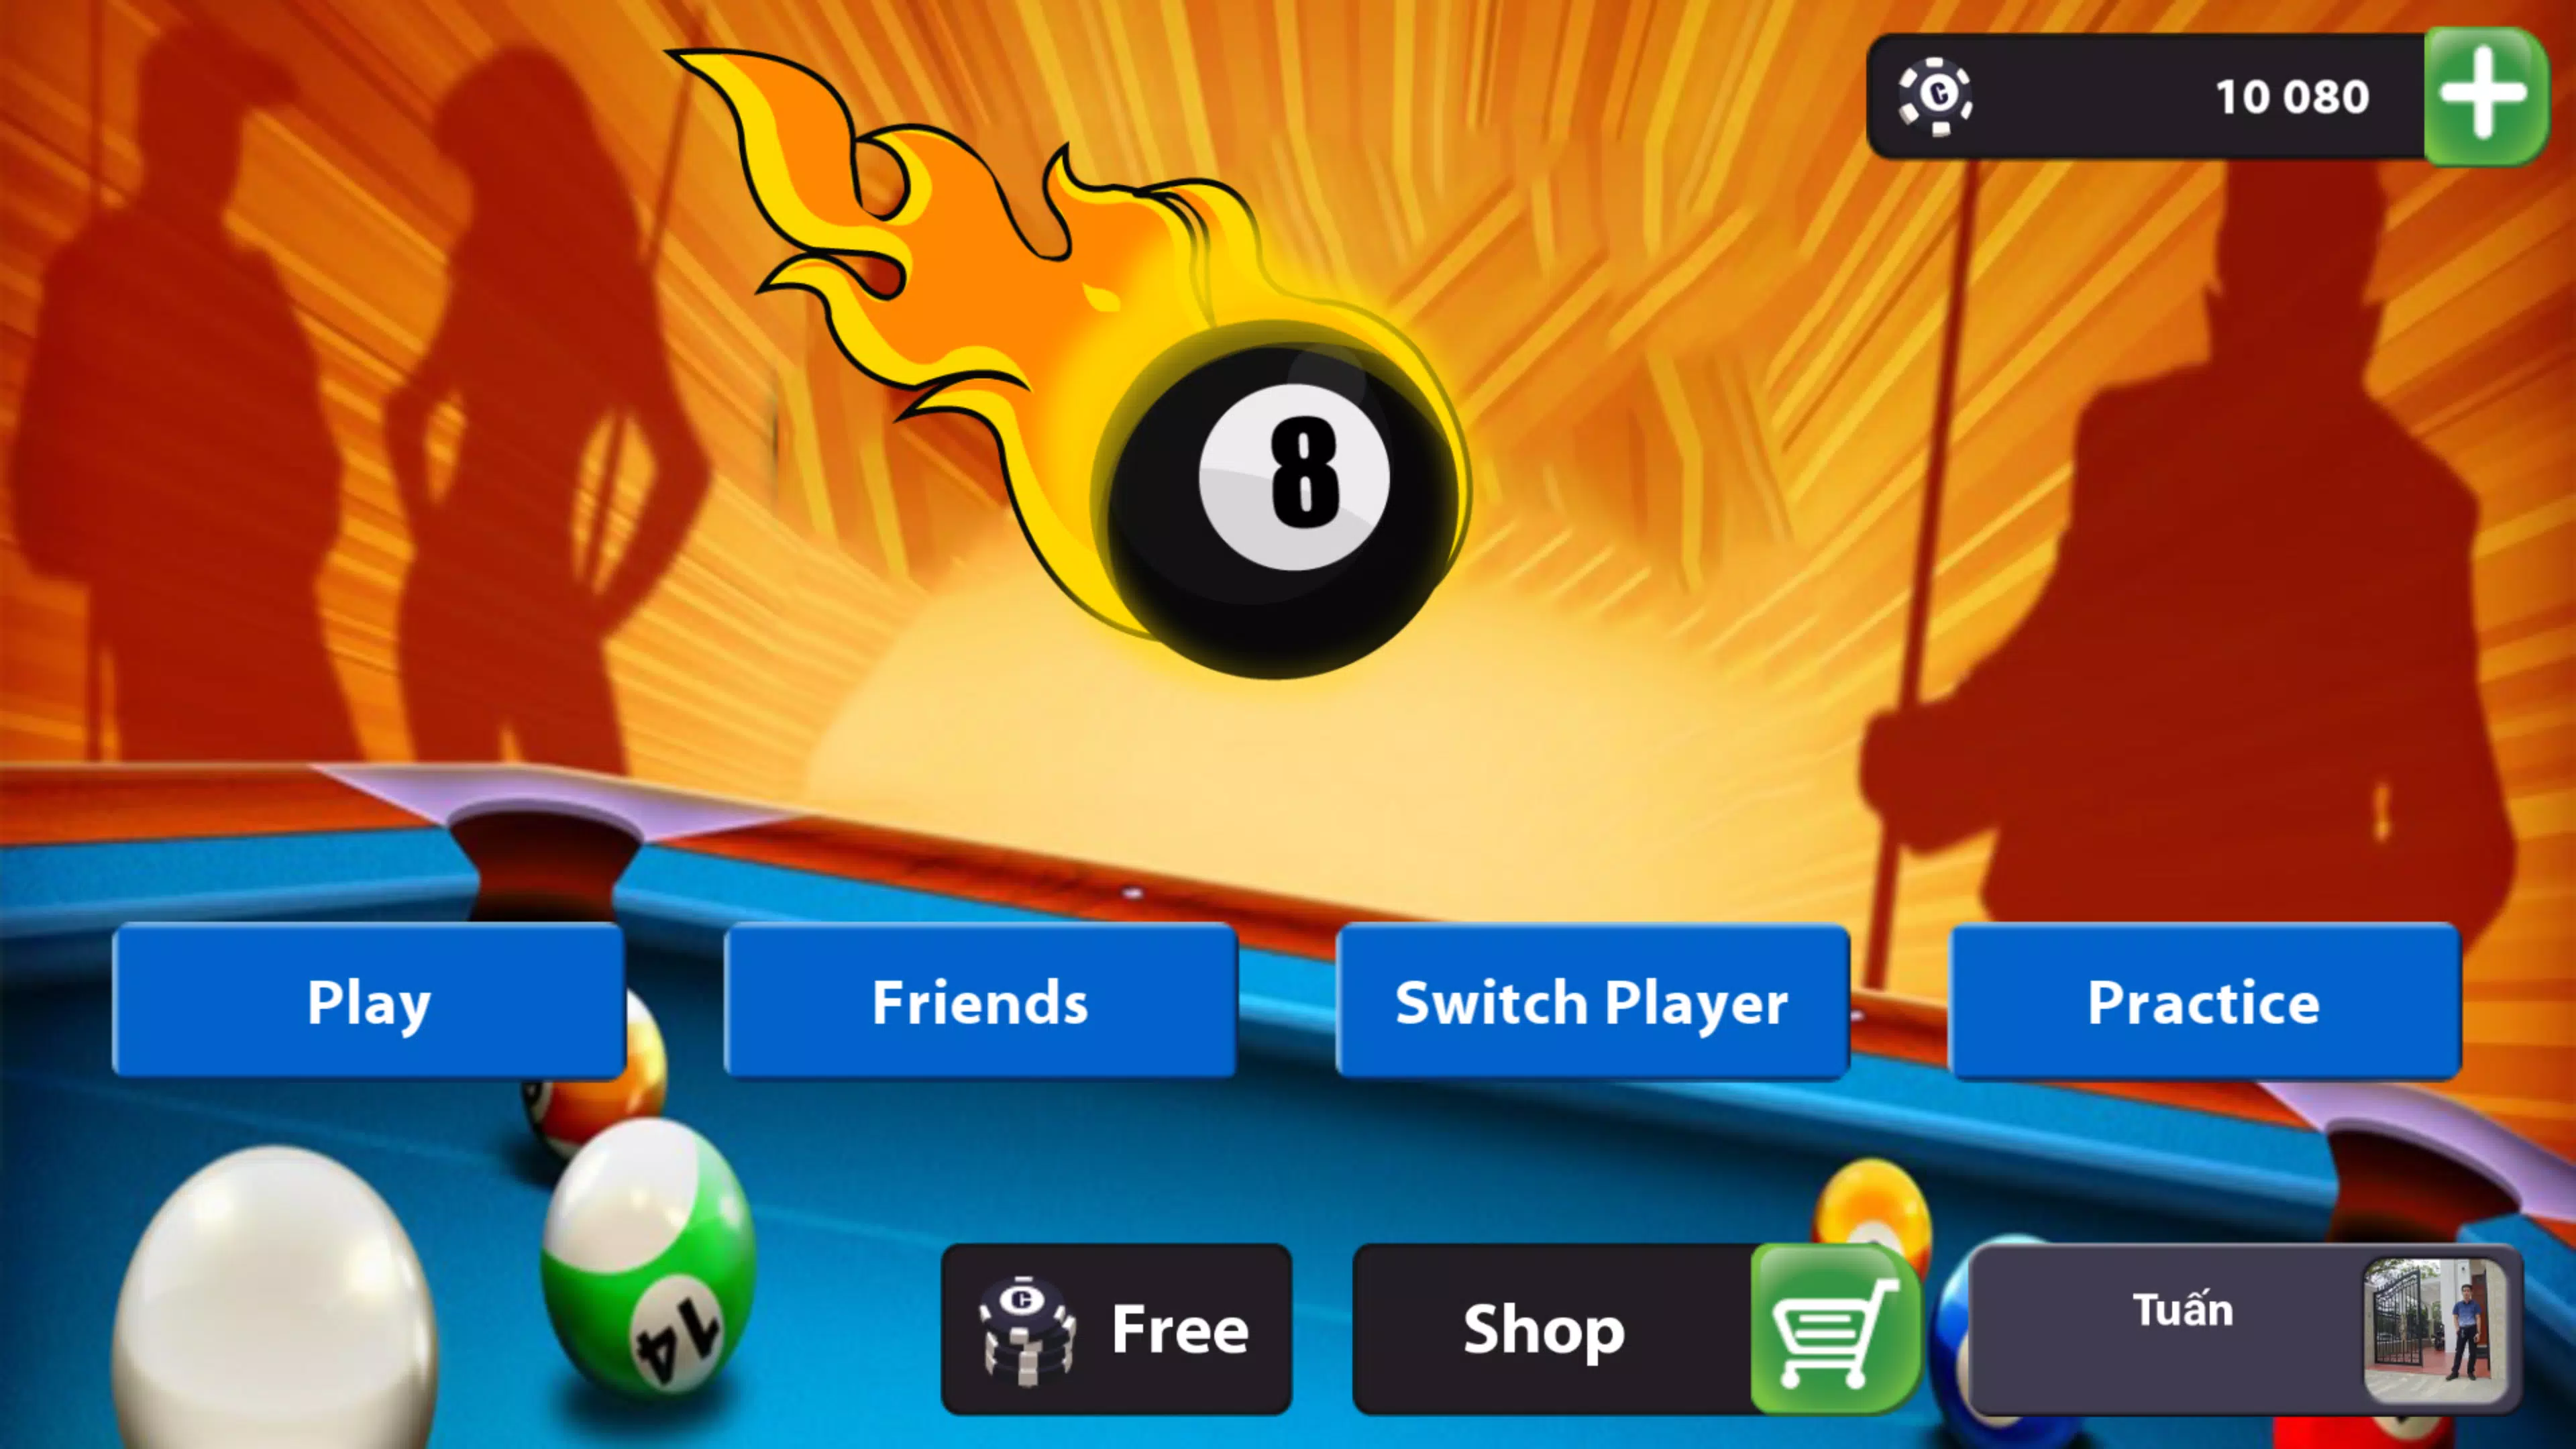 8 Ball Pool Hack – How to Play 8 Ball Pool on Facebook